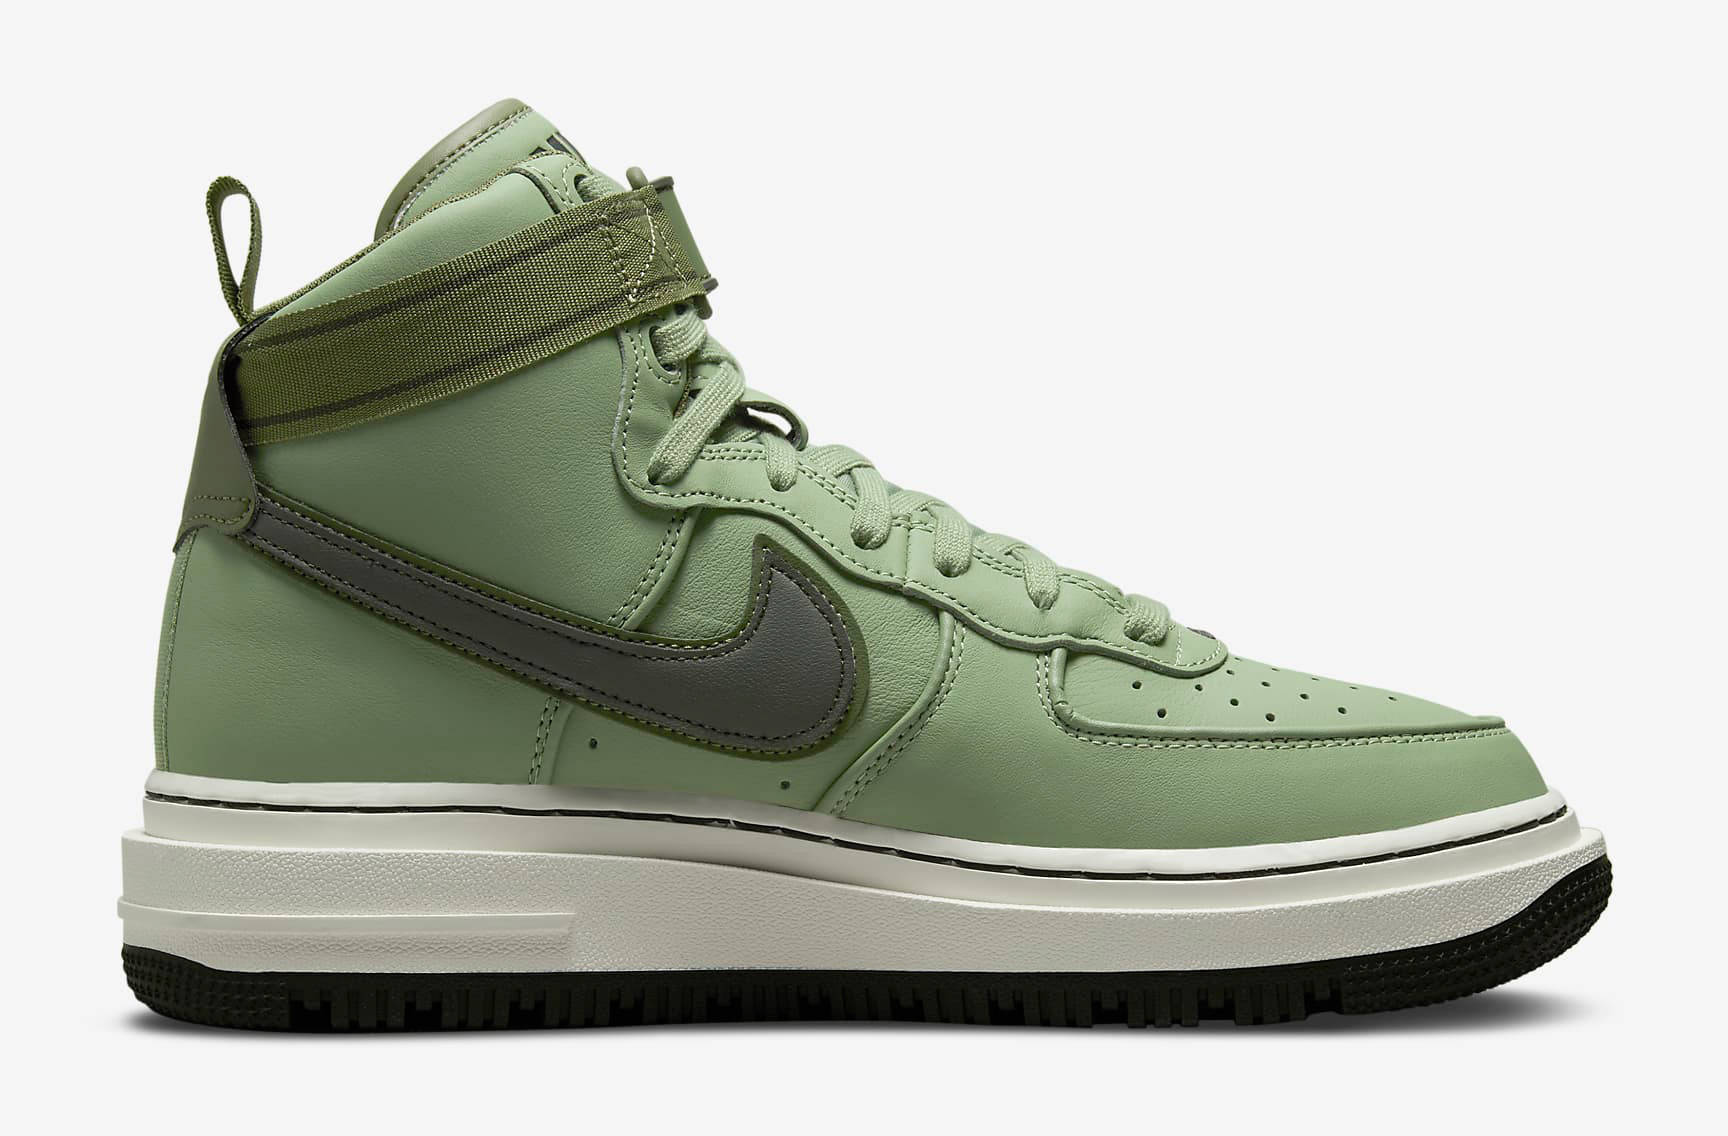 nike-air-force-1-boots-oil-green-medium-olive-3